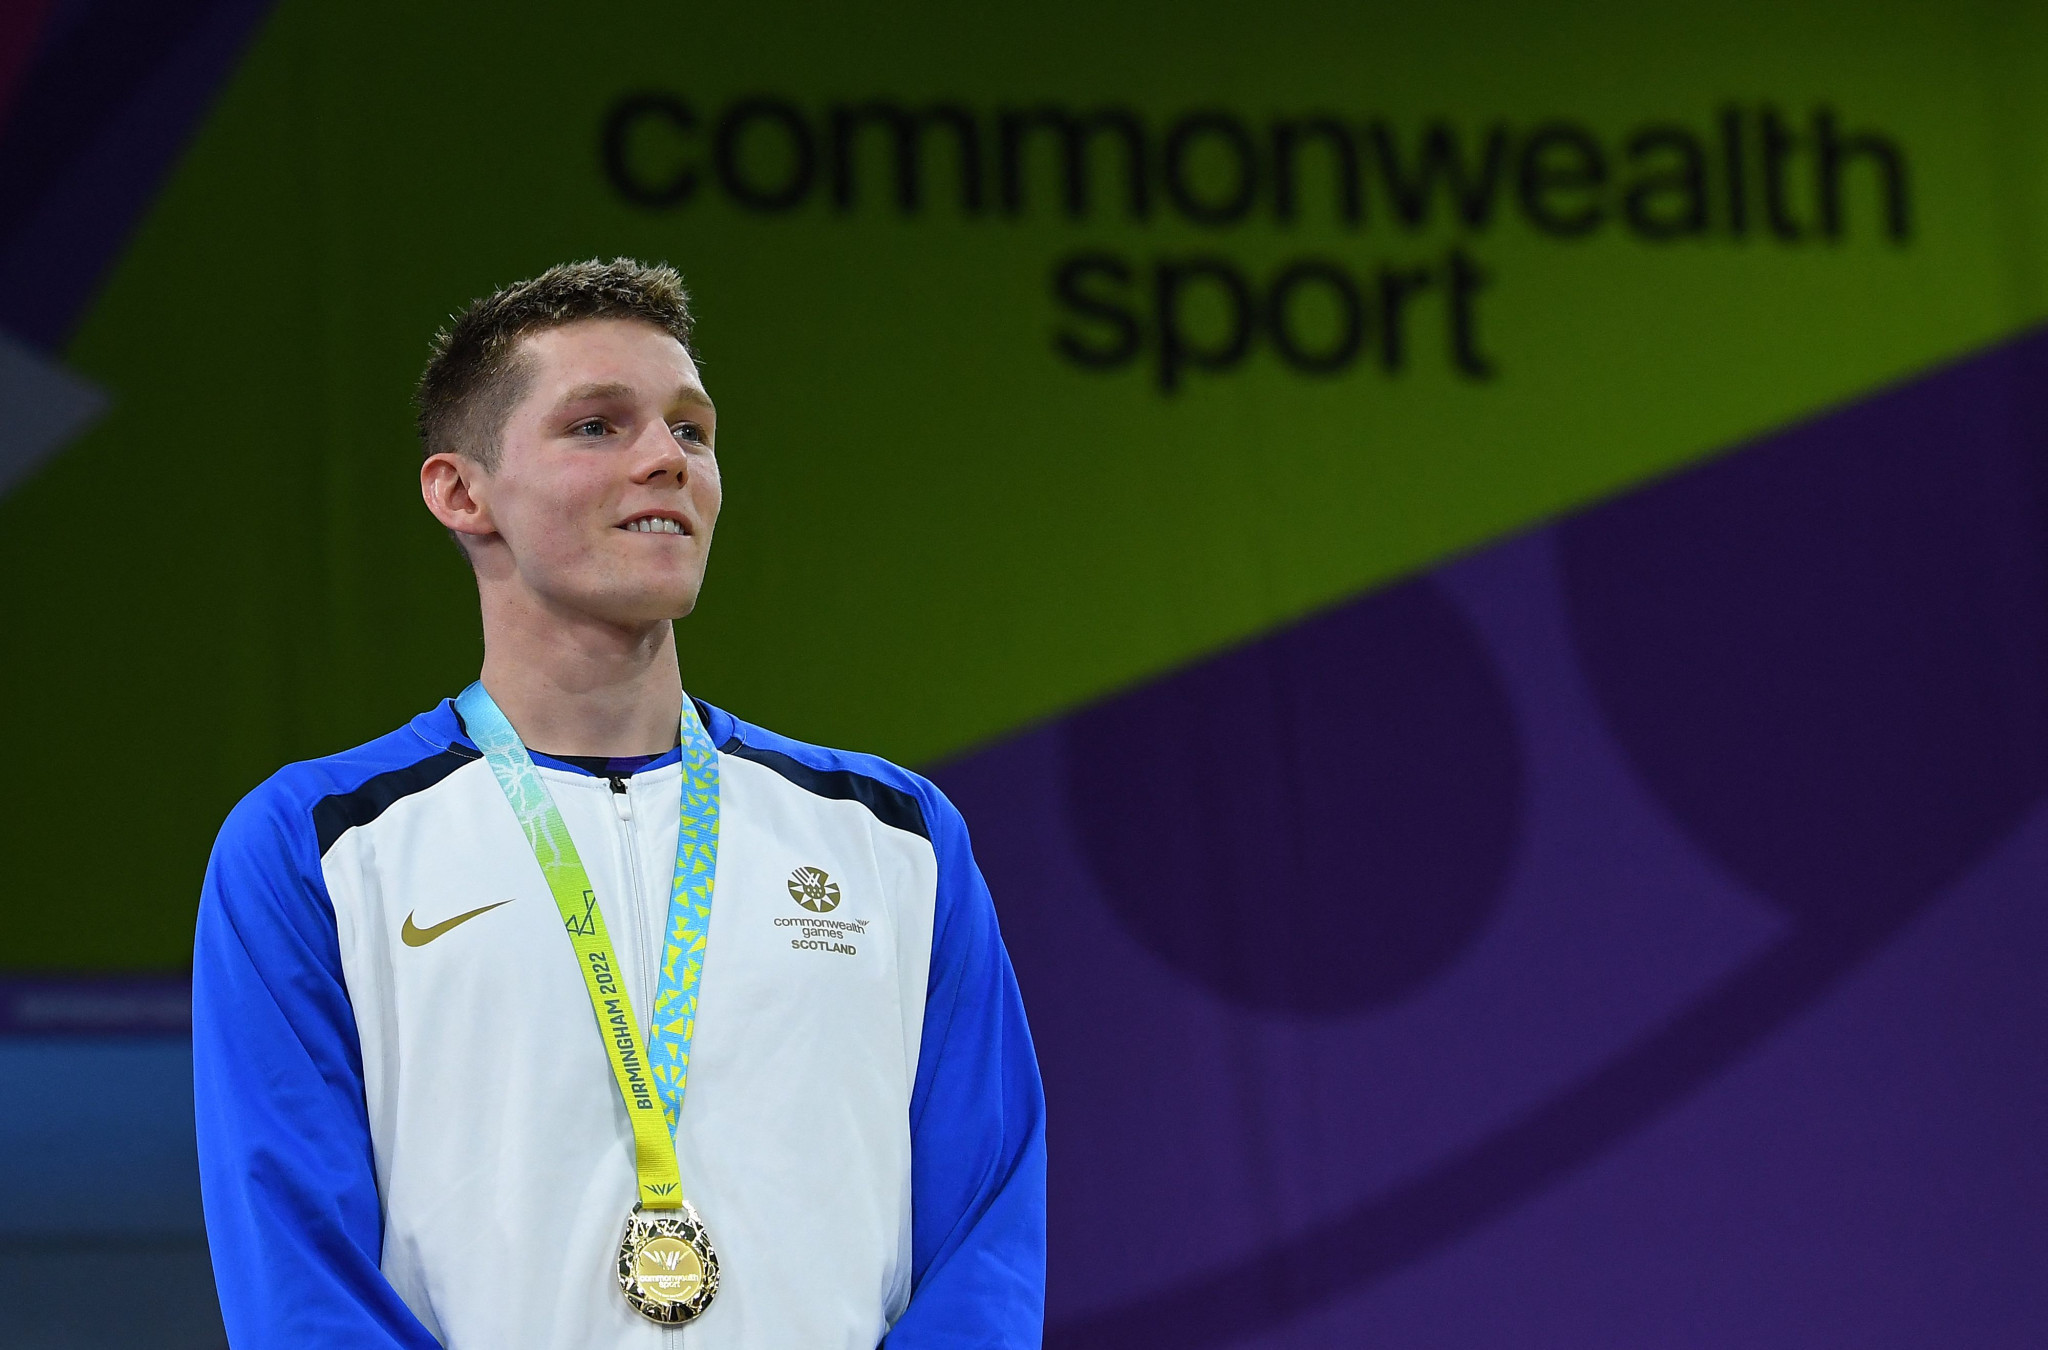 Scott and Proud add to medal tallies on final day of swimming at Birmingham 2022